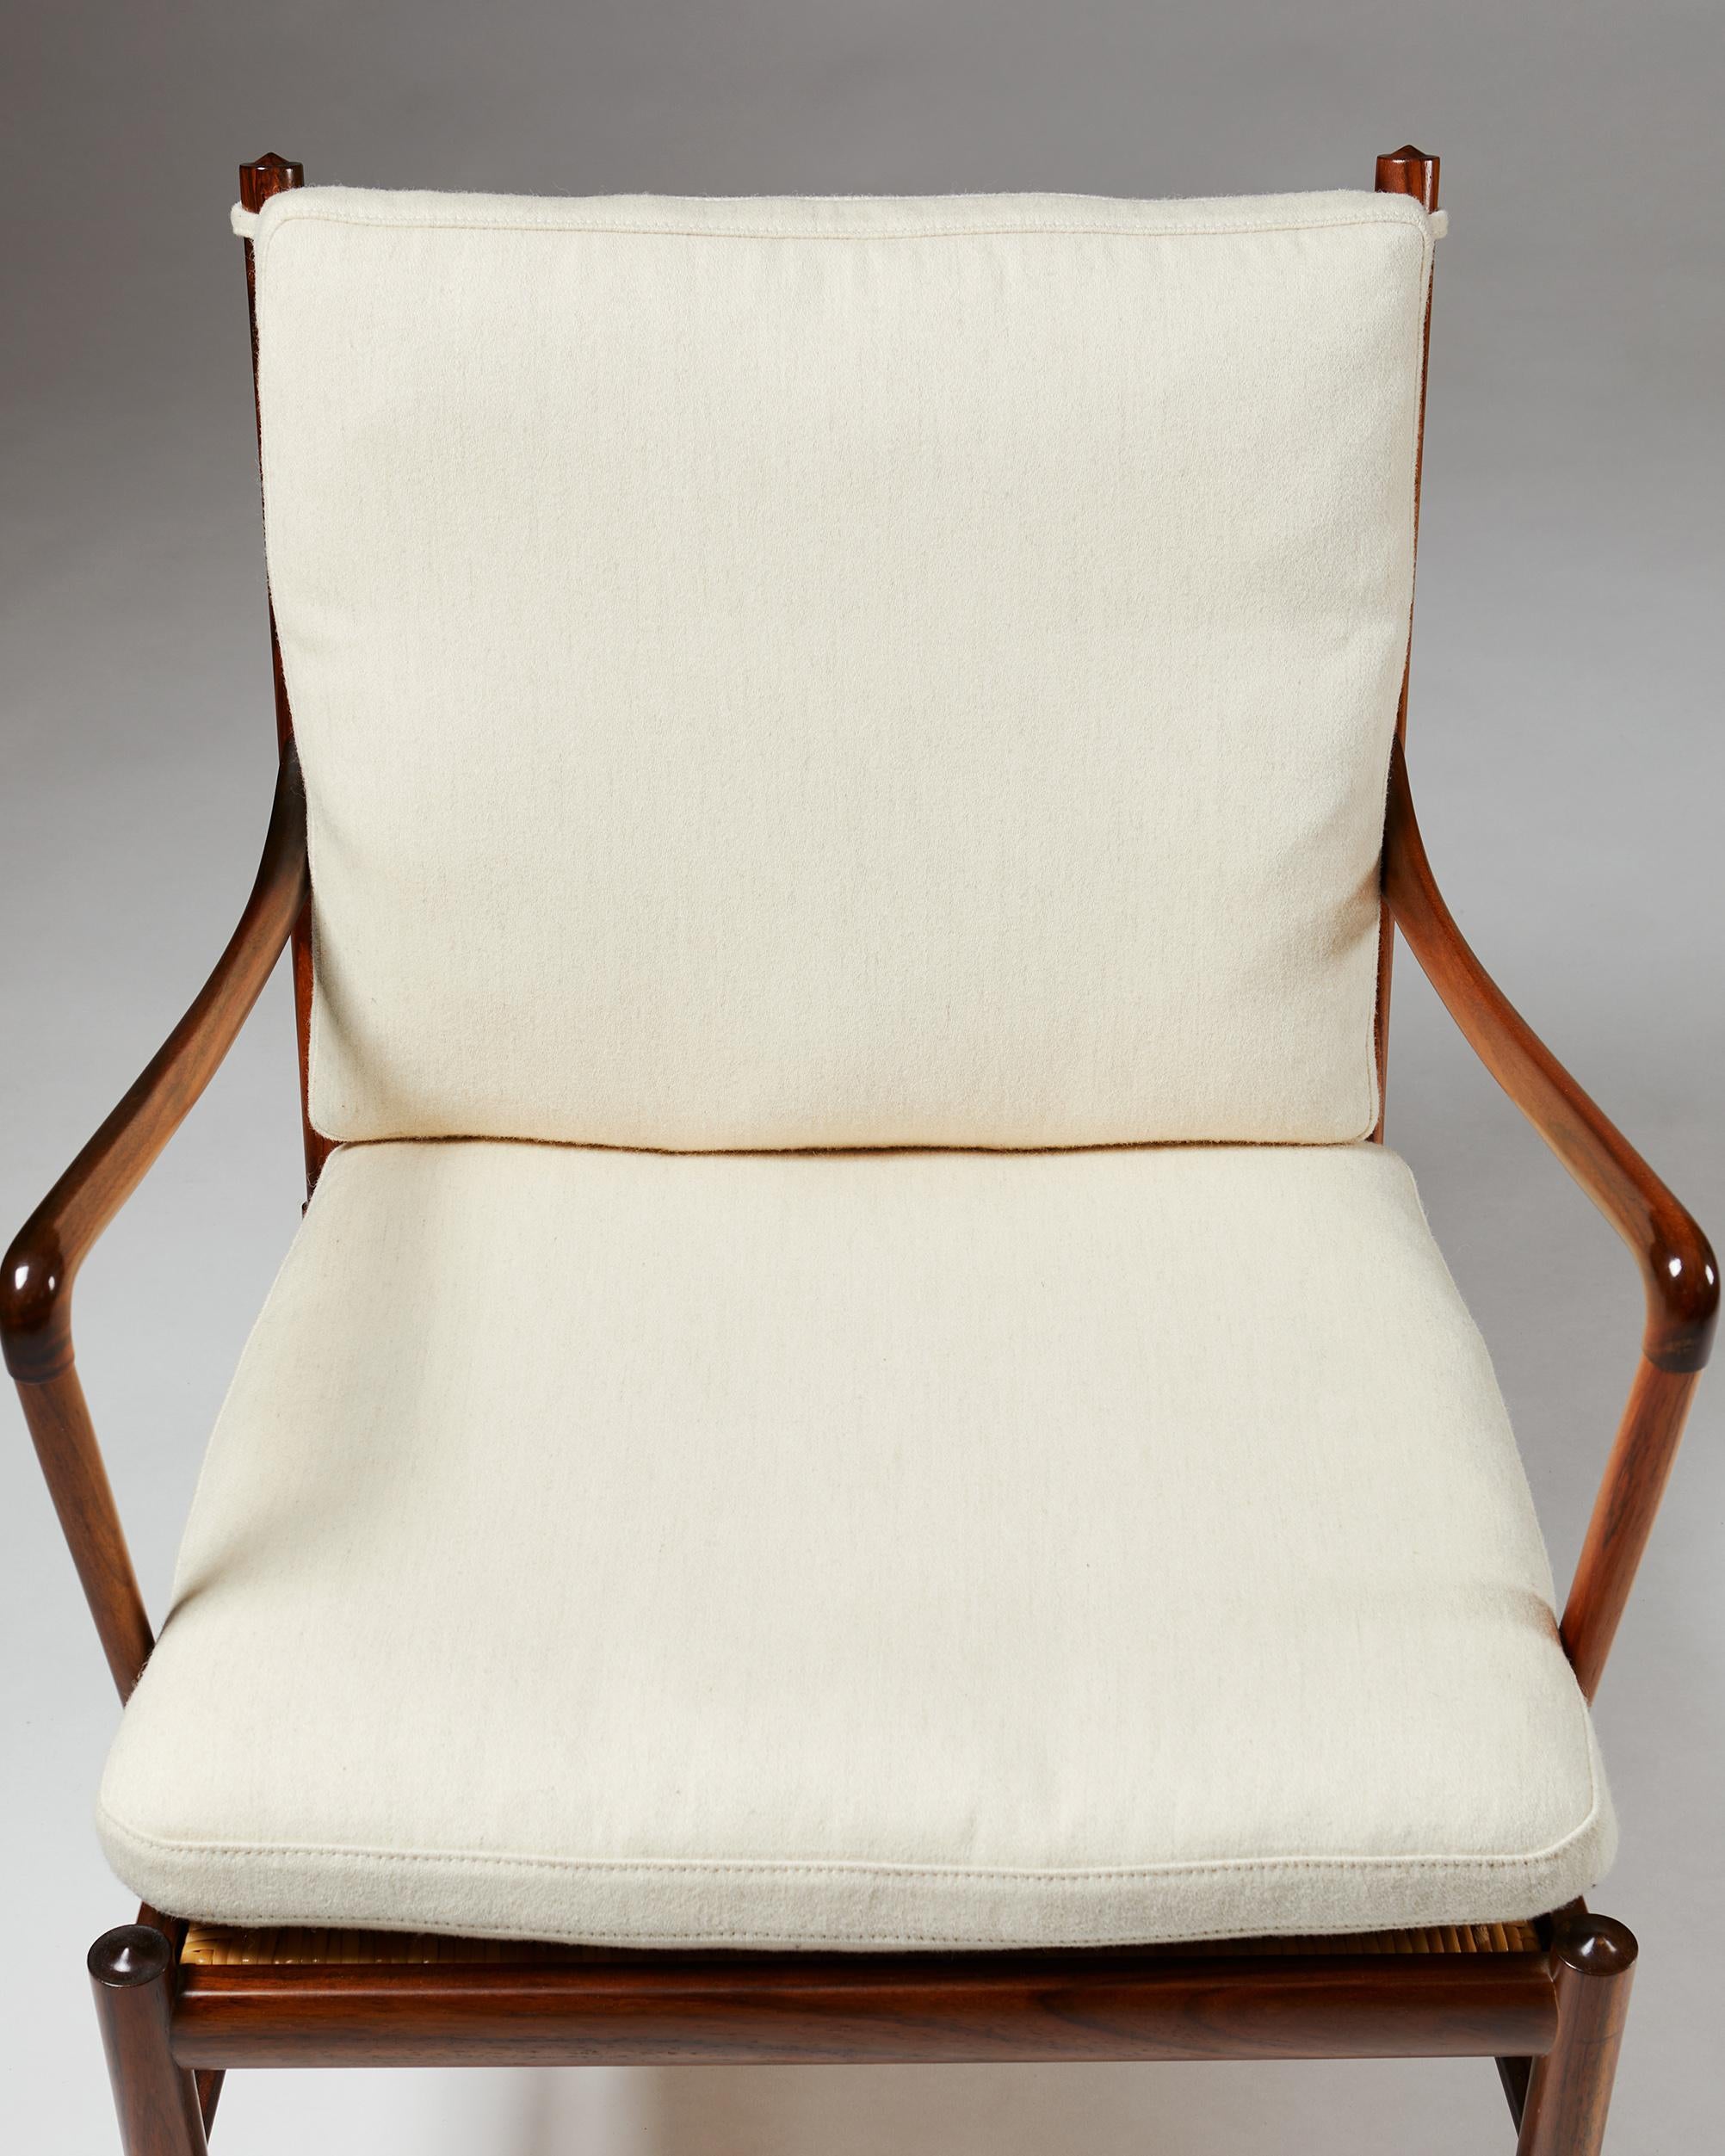 Pair of Armchairs, PJ 149, “Colonial”, Designed by Ole Wanscher for P. Jeppesen 2